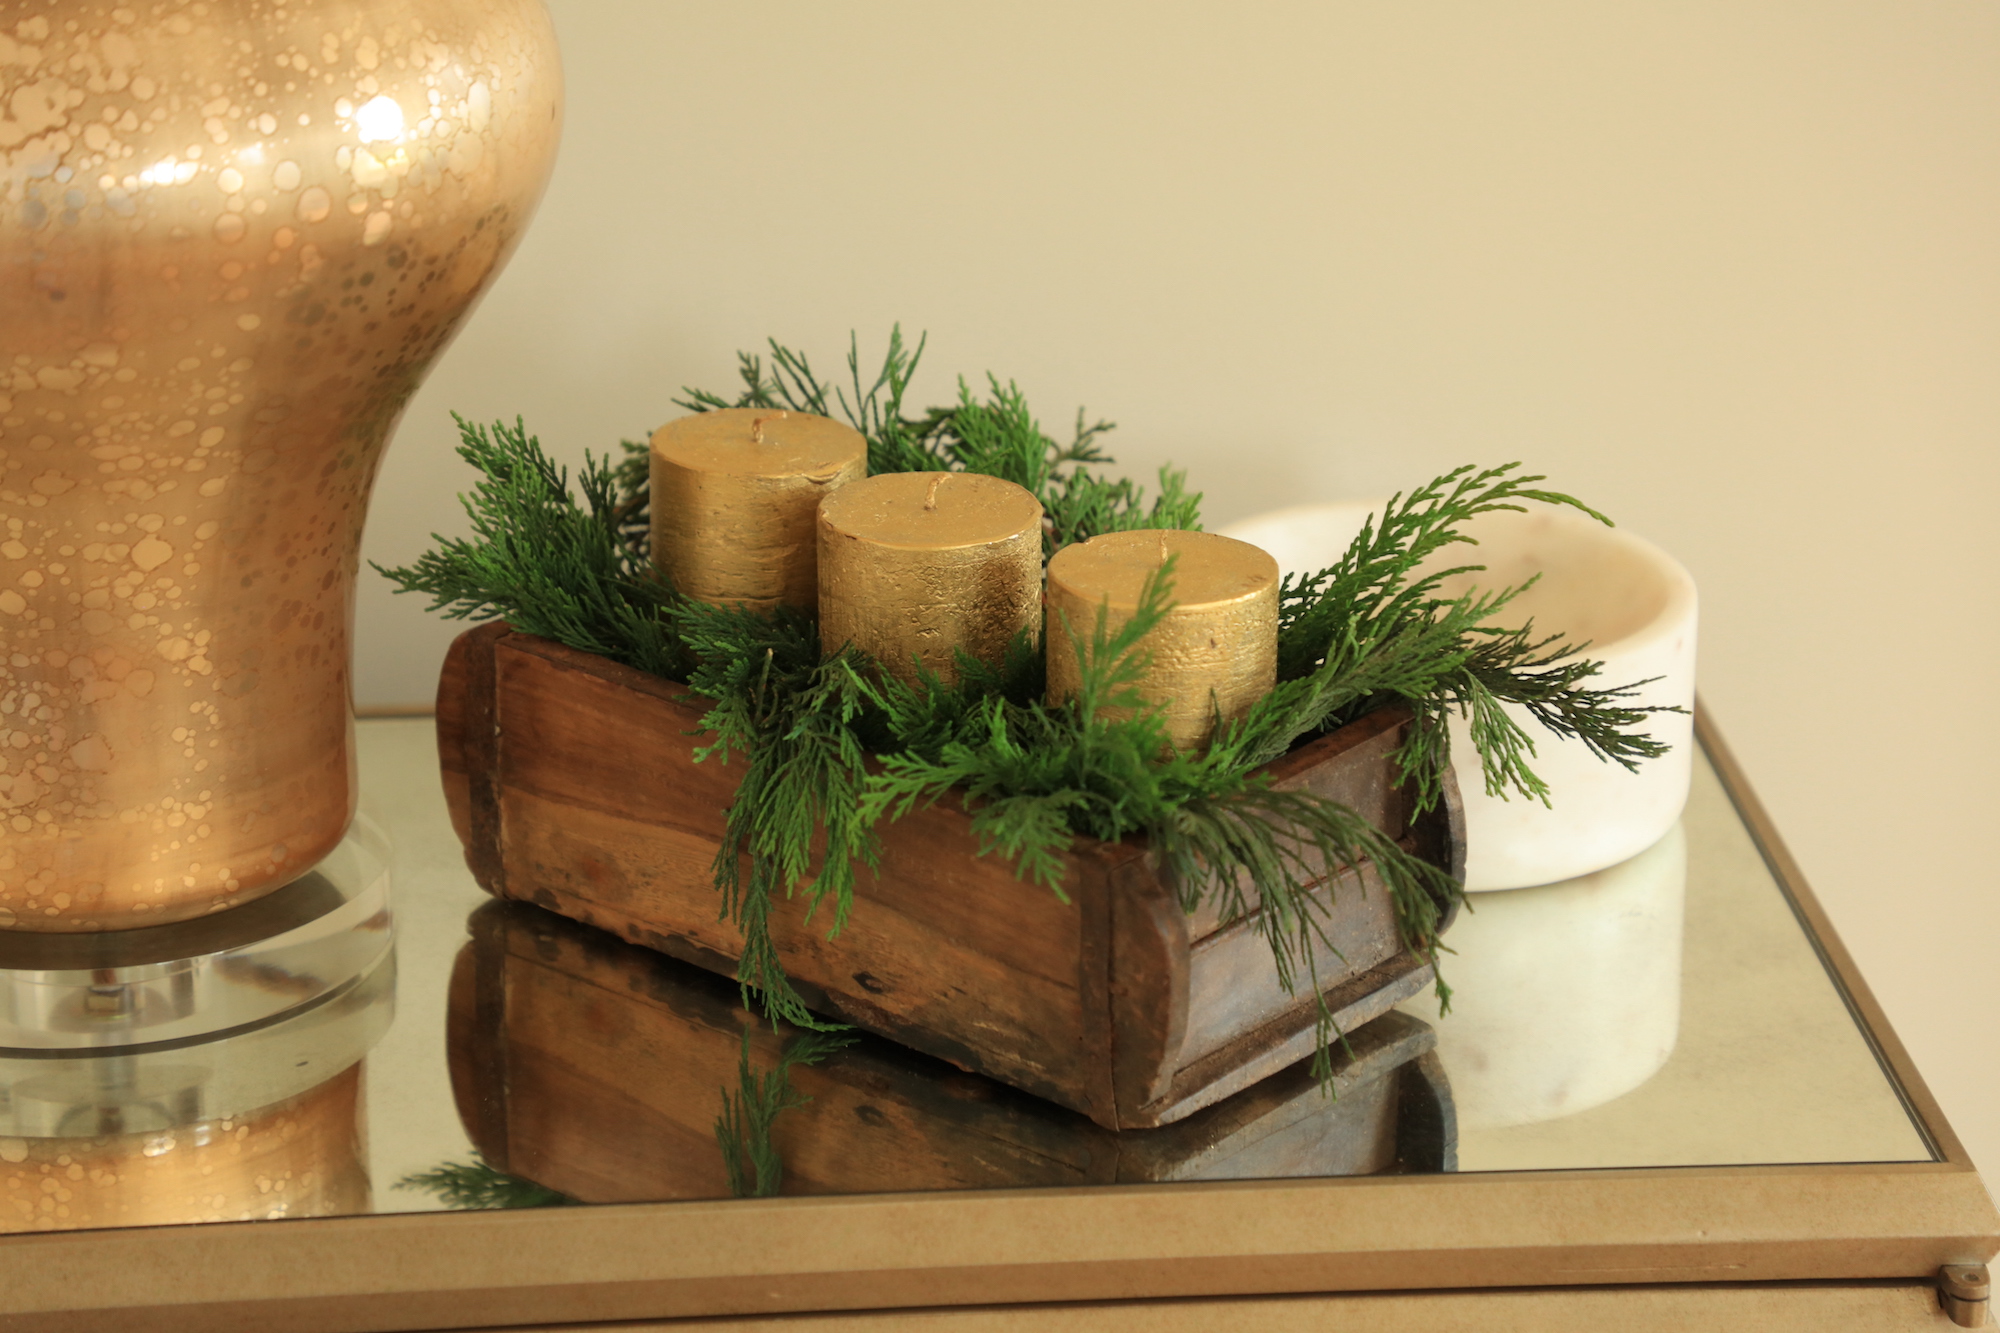 Gold church pillar candles in traditional brick mould and conifer sprigs